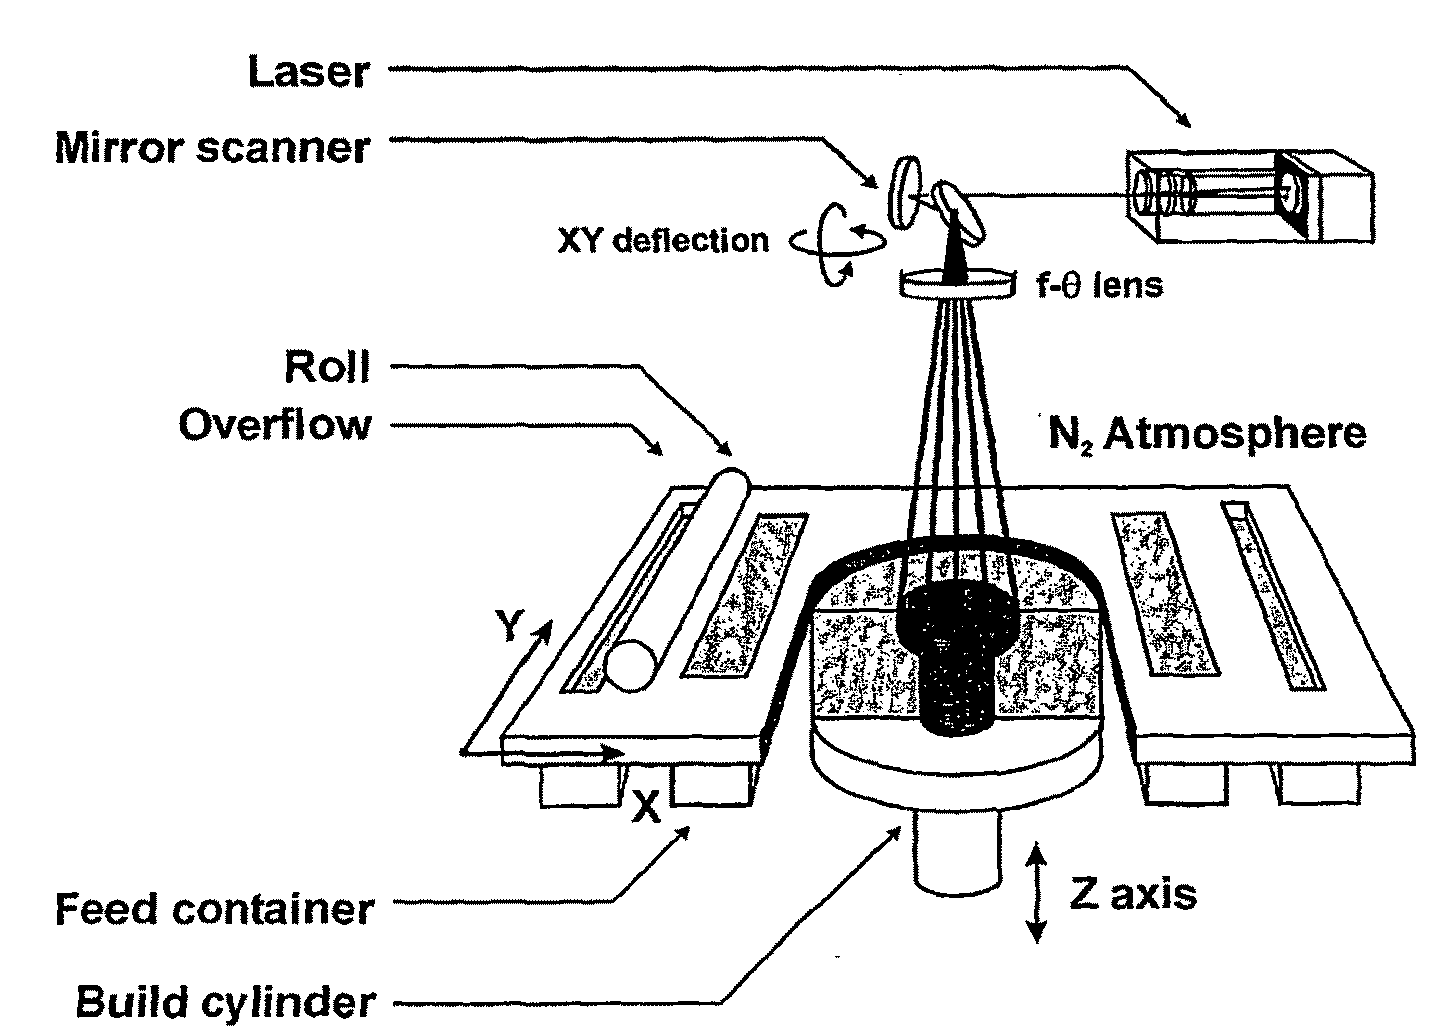 Procedure and apparatus for in-situ monitoring and feedback control of selective laser powder processing